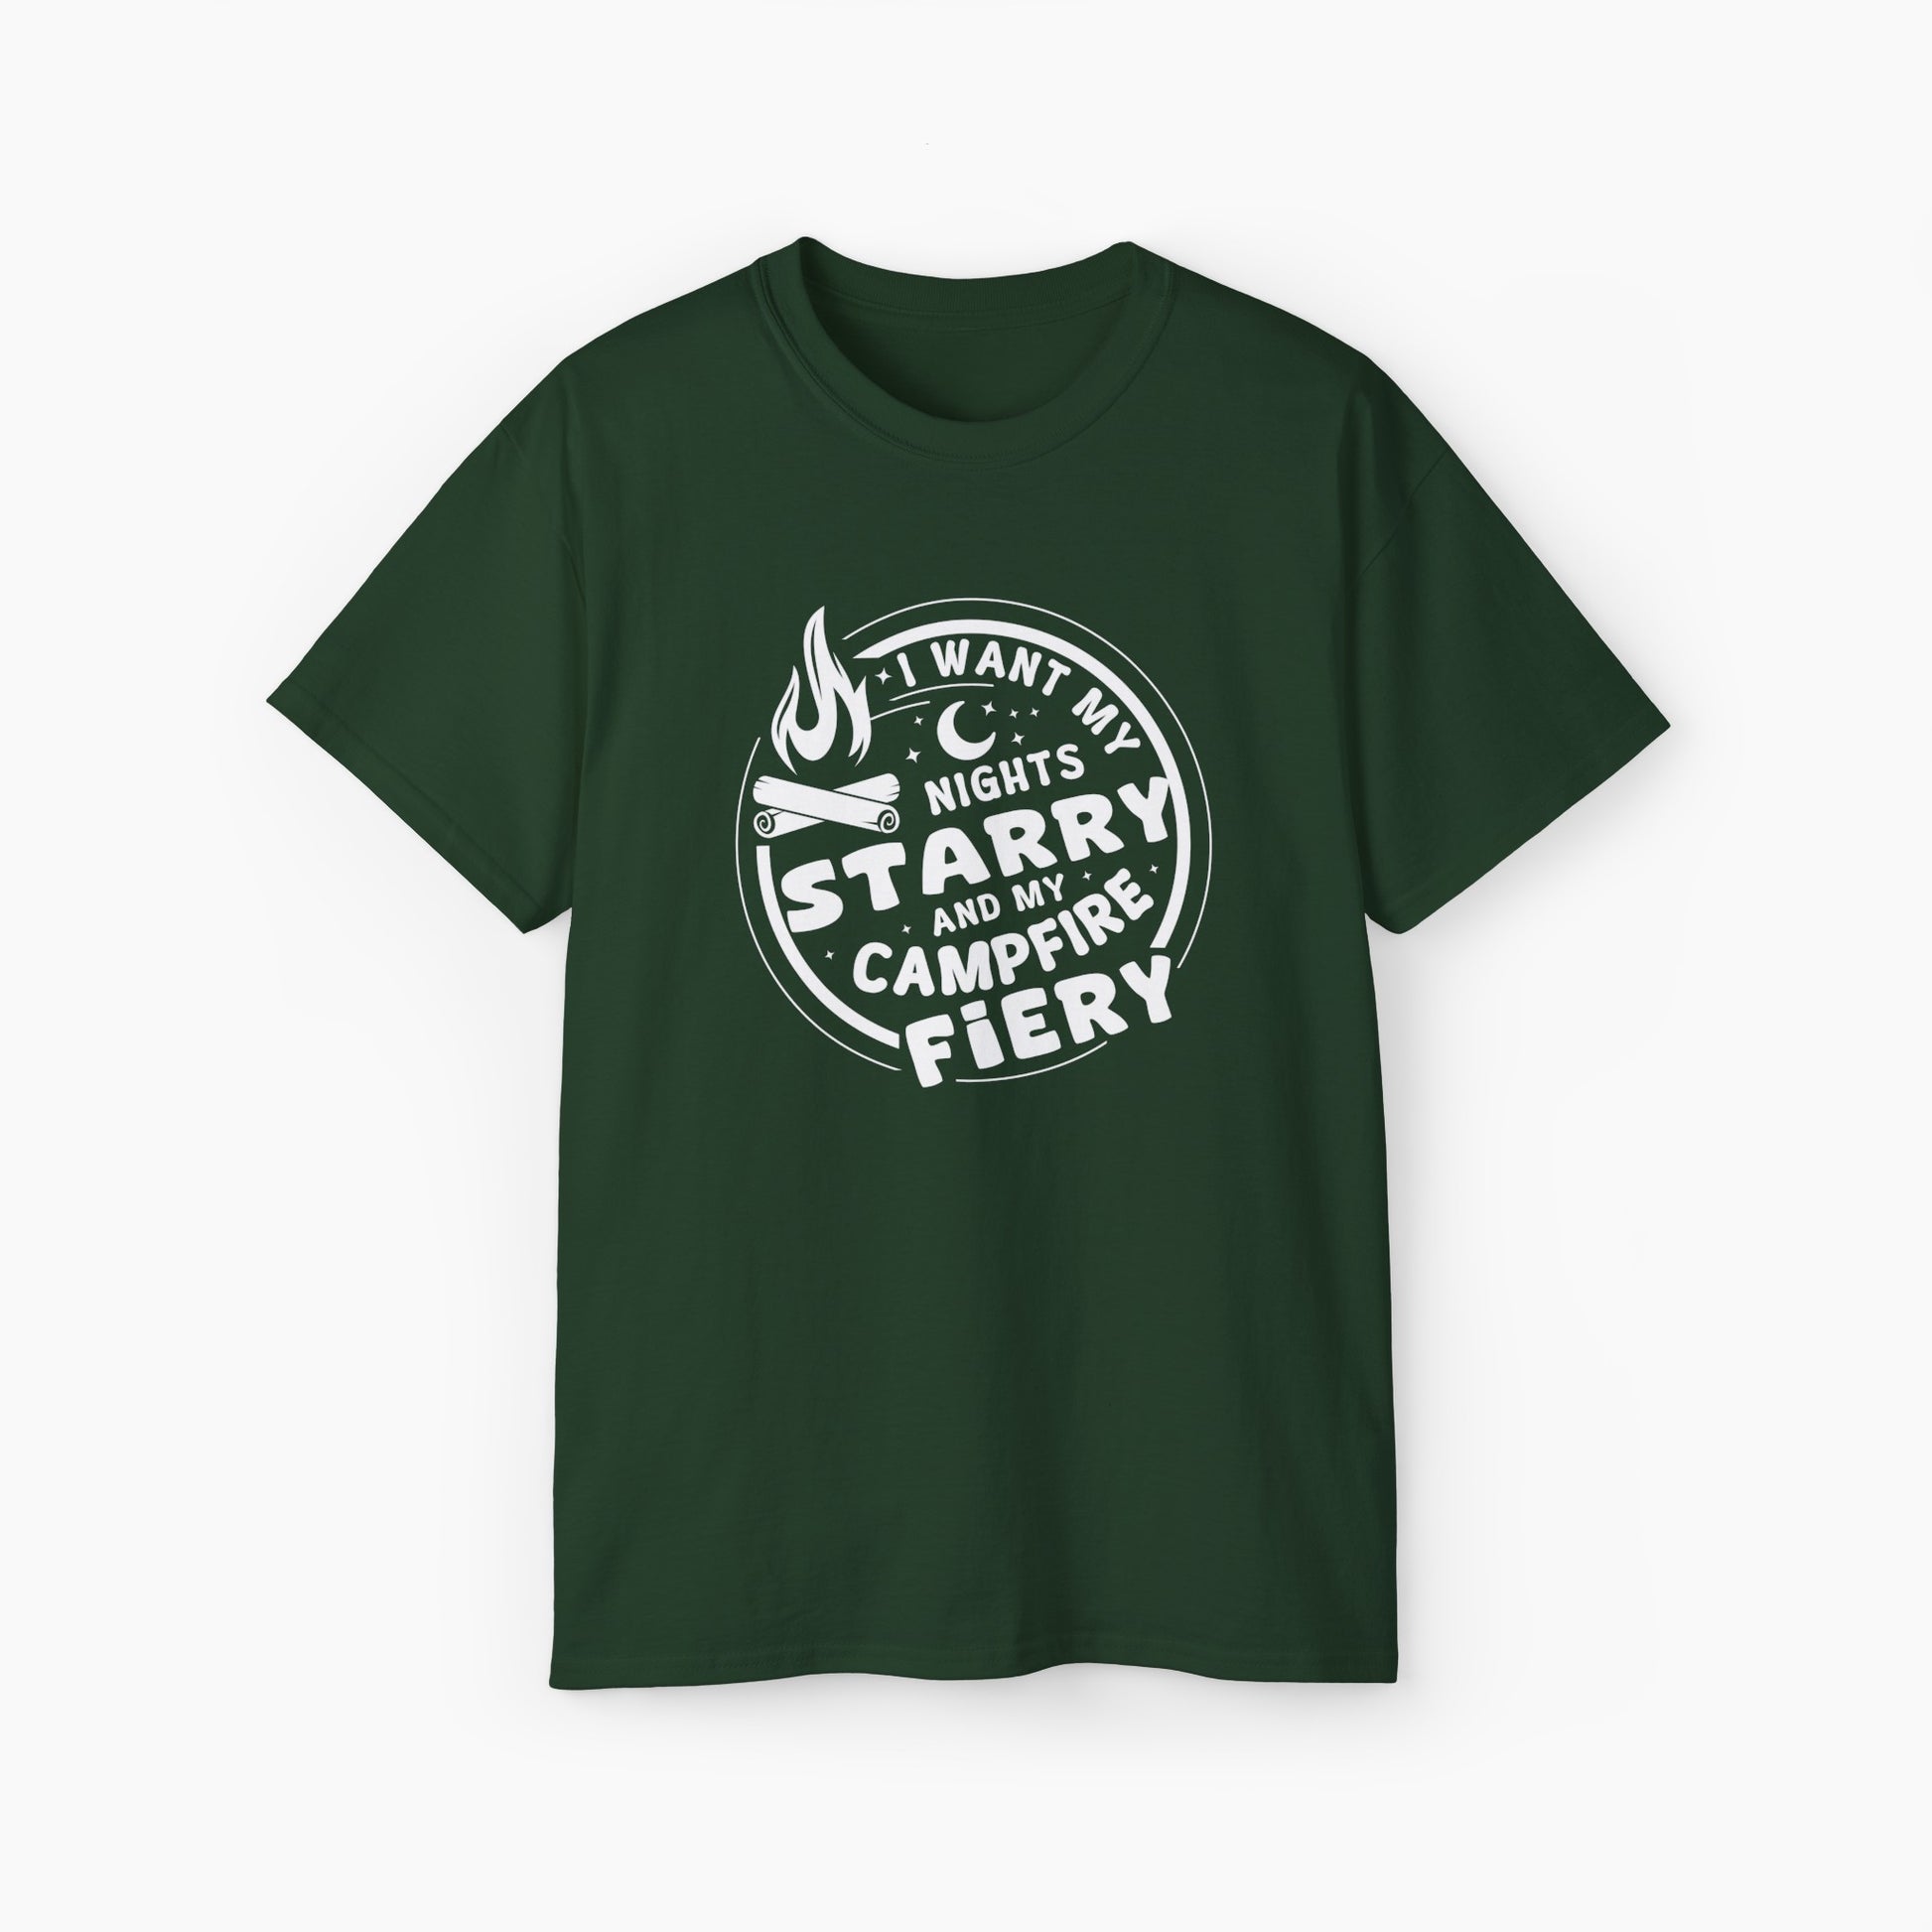 Green t-shirt with the text 'I want my nights starry and my campfire fiery' in a circular design, featuring a campfire, stars, and moon on a plain background.